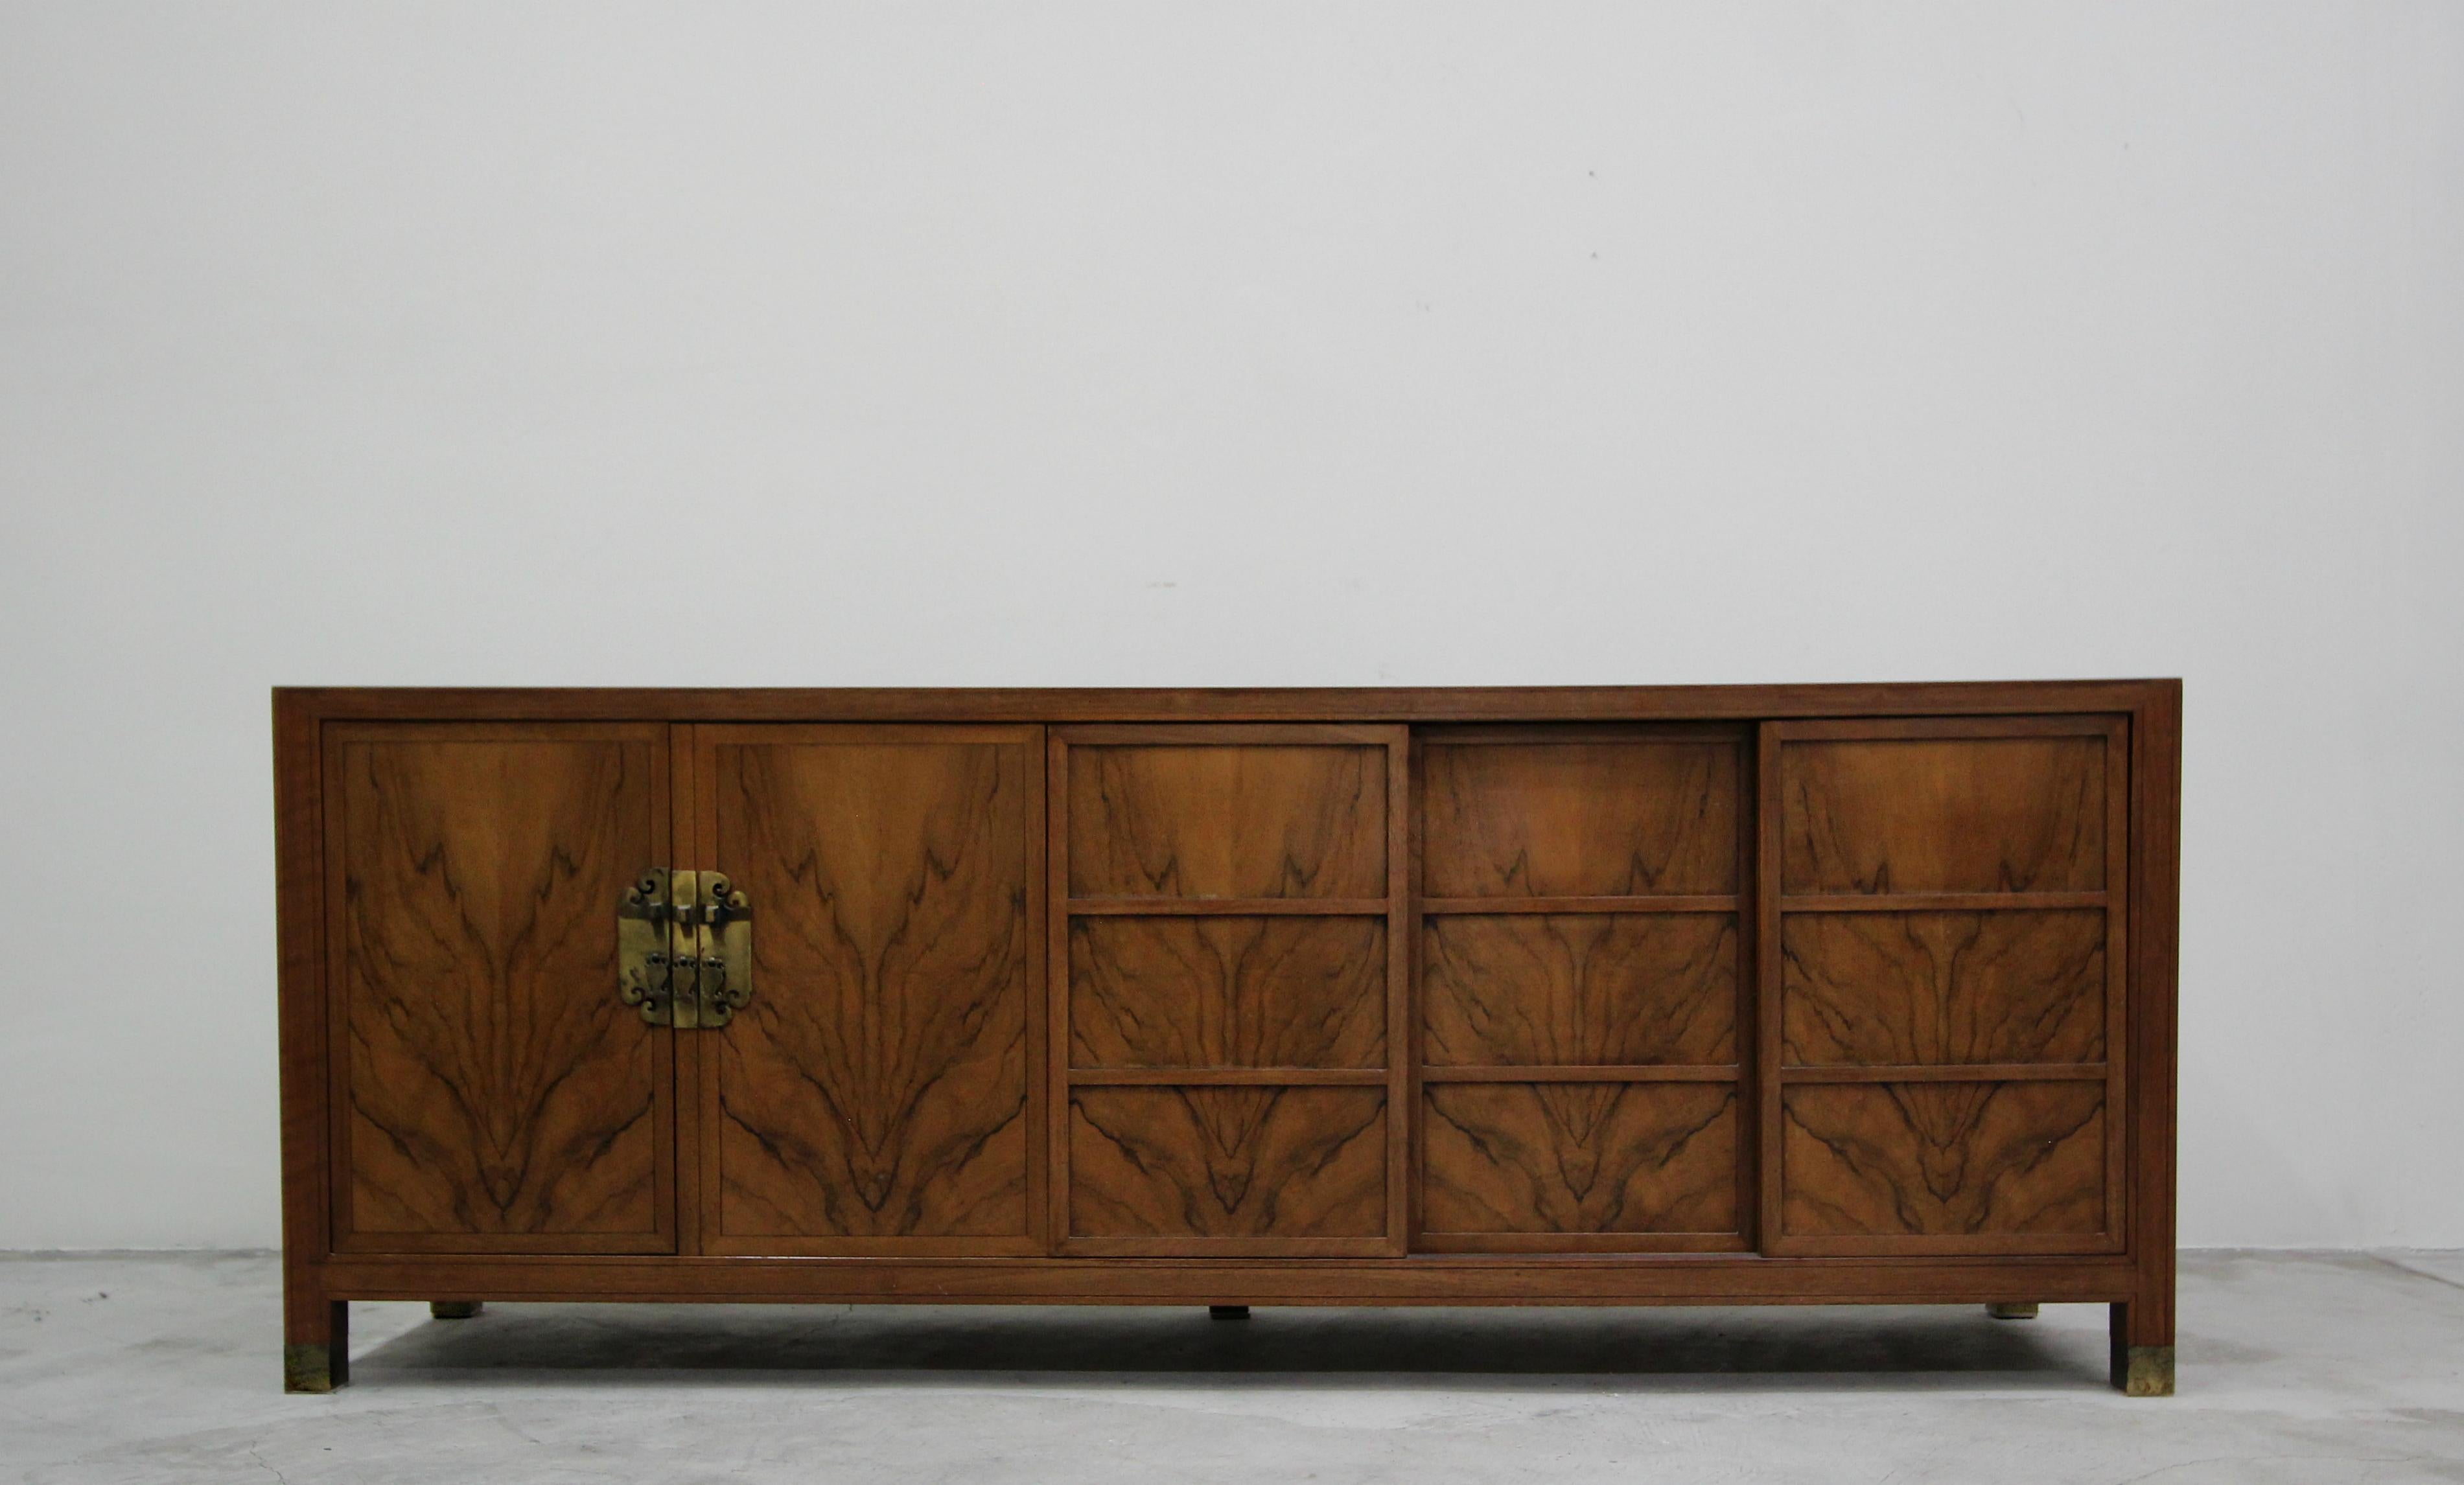 Beautiful midcentury walnut credenza. When it comes to amazing grain, this beauty takes the cake. Designed by Frank Van Steenberg for the Baker Far East Collection, the brass escutcheon details and shoji screen style doors give it that Asian flair.